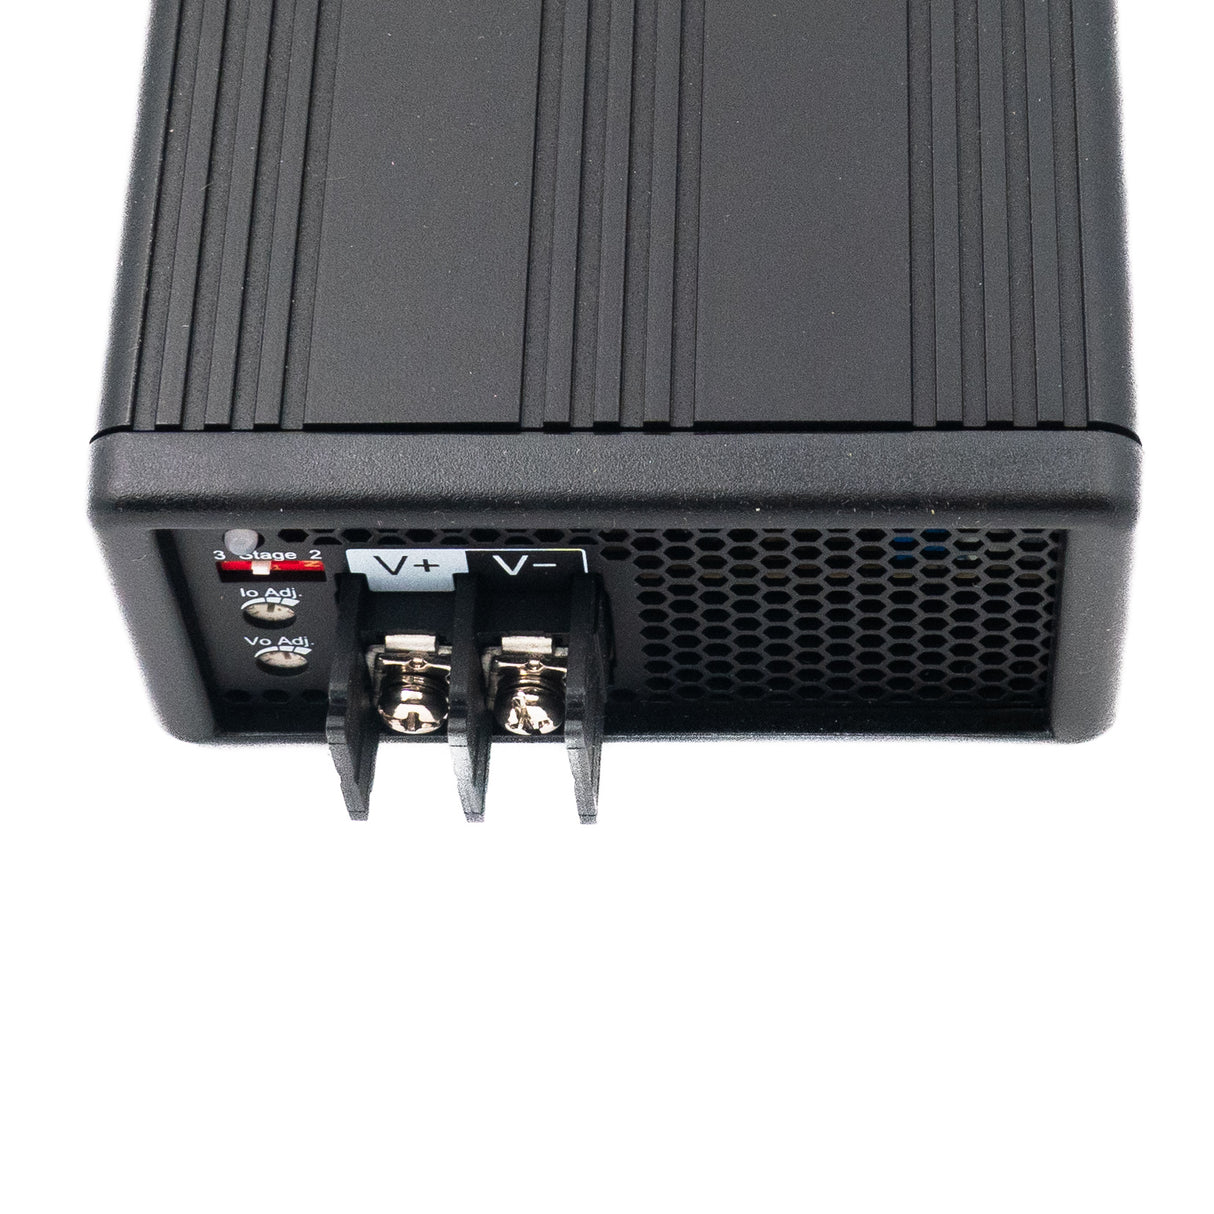 Mean Well NPB-240-12TB Battery Charger 240W 12V with Terminal Block - PHOTO 2